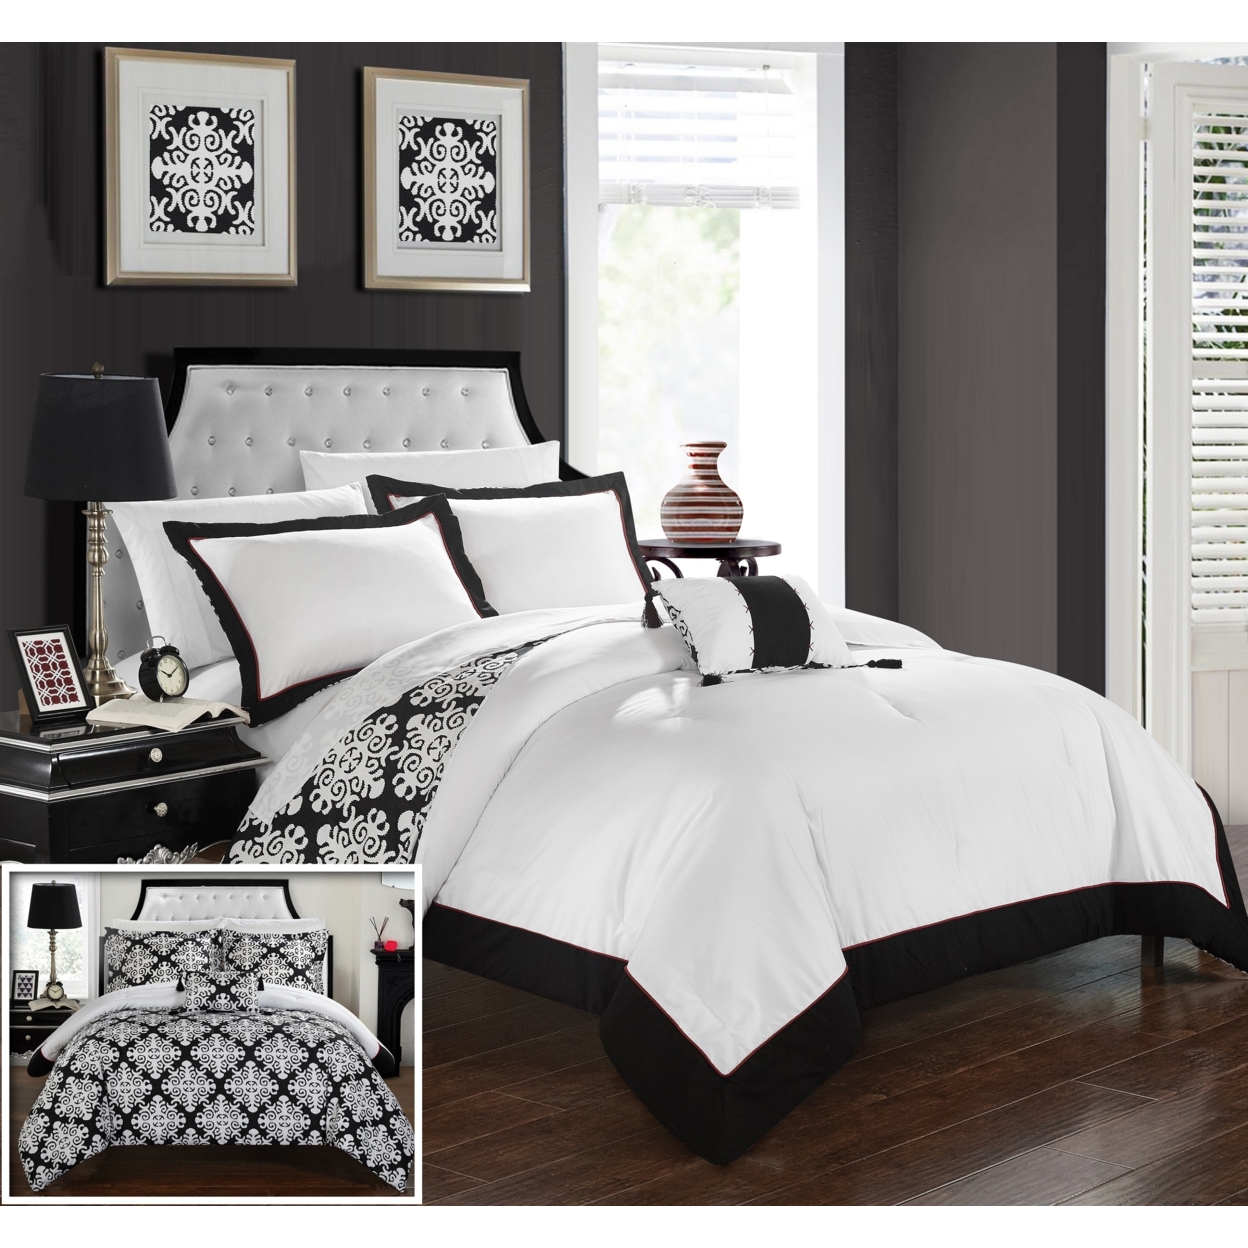 Chic Home 3/4 Piece Mallow Black And White REVERSIBLE Medallion Printed PLUSH Hotel Collection Duvet Cover Set - Black, Queen